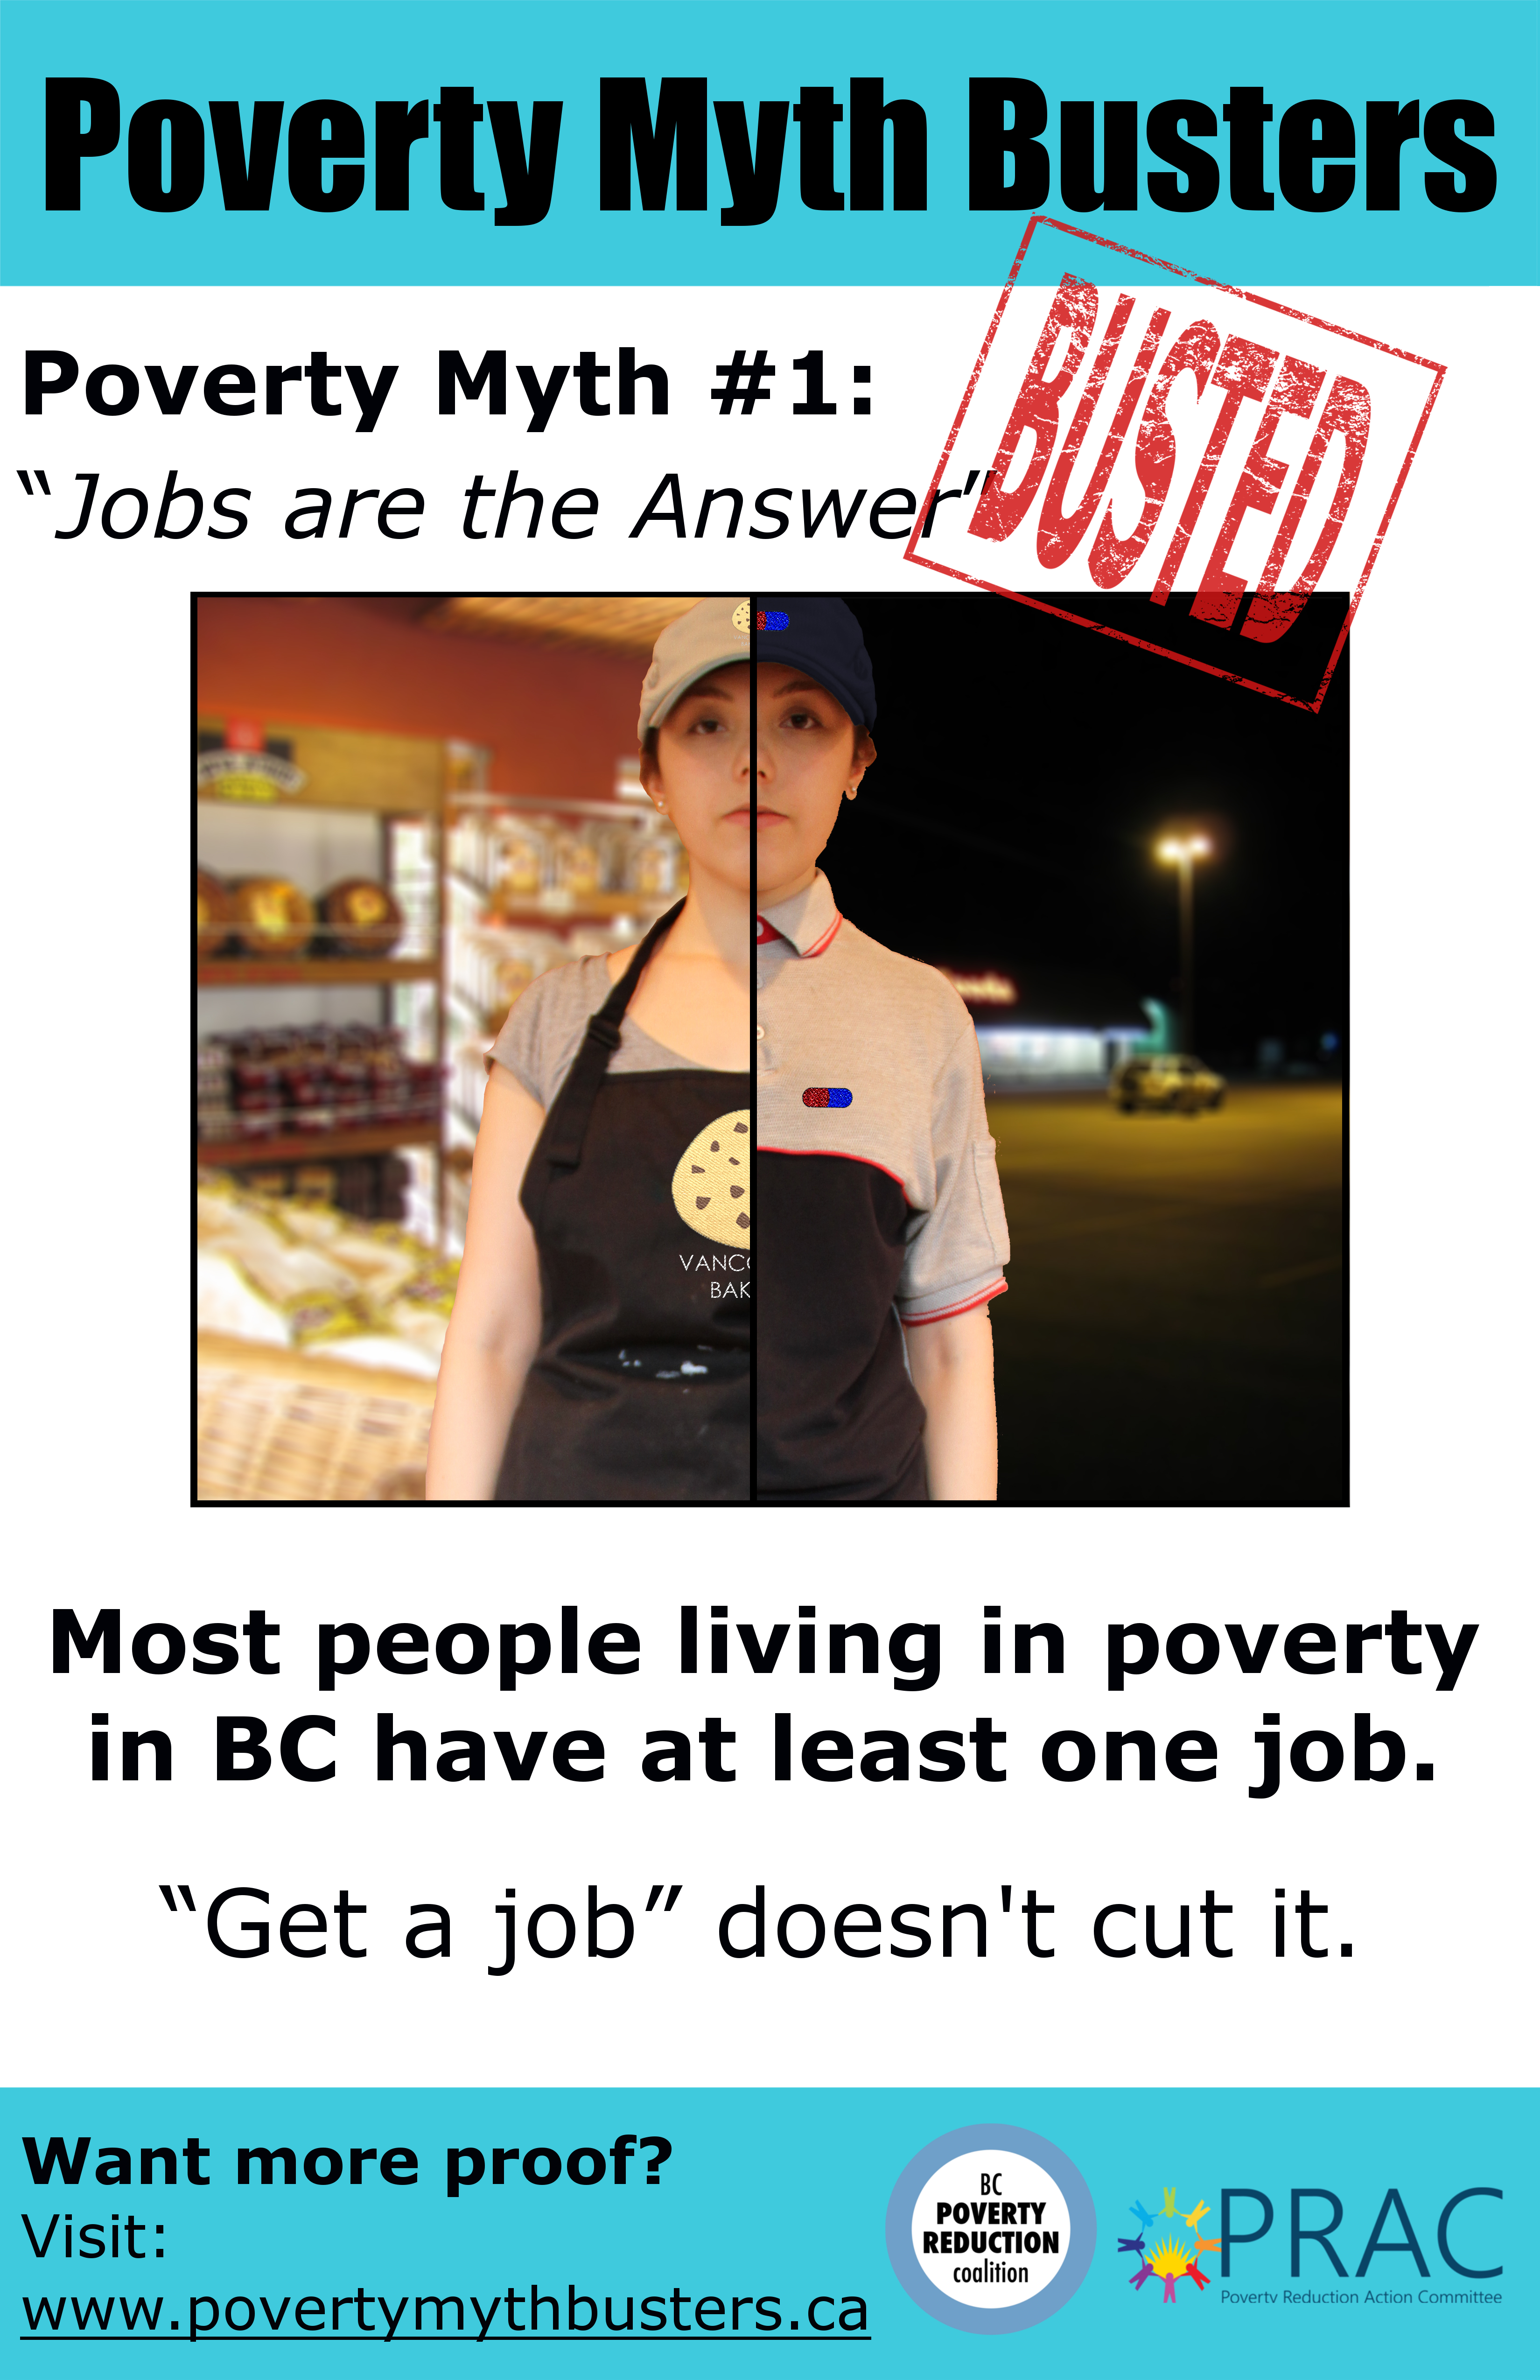 Poverty Myth Busters poster